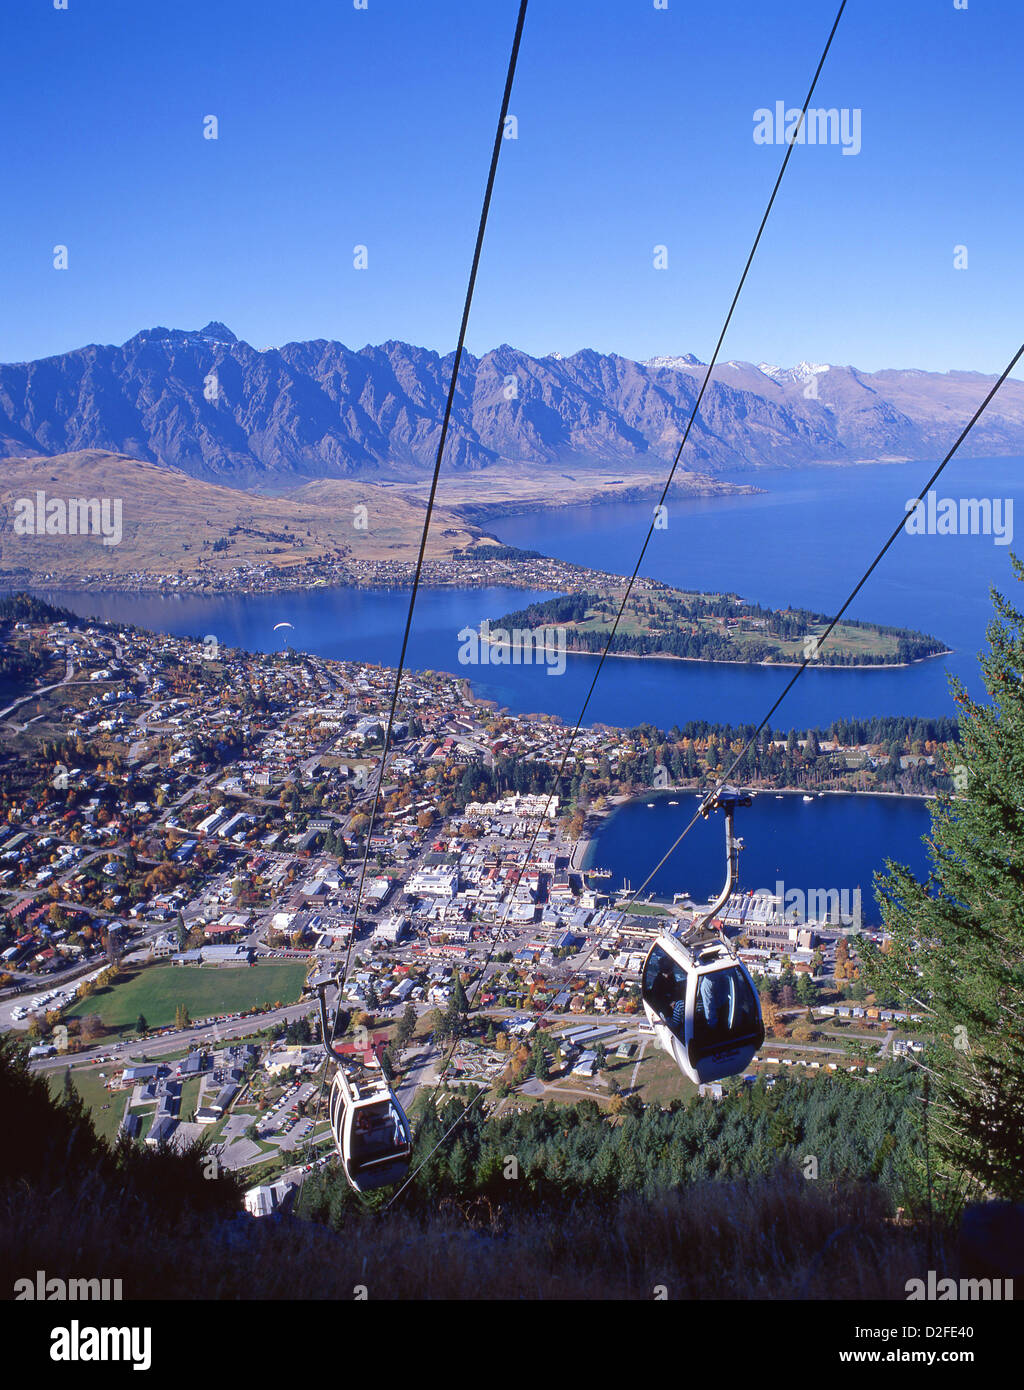 The Skyline Gondola with town, Lake Wakatipu and The Remarkables behind, Queenstown, Otago Region, South Island, New Zealand Stock Photo